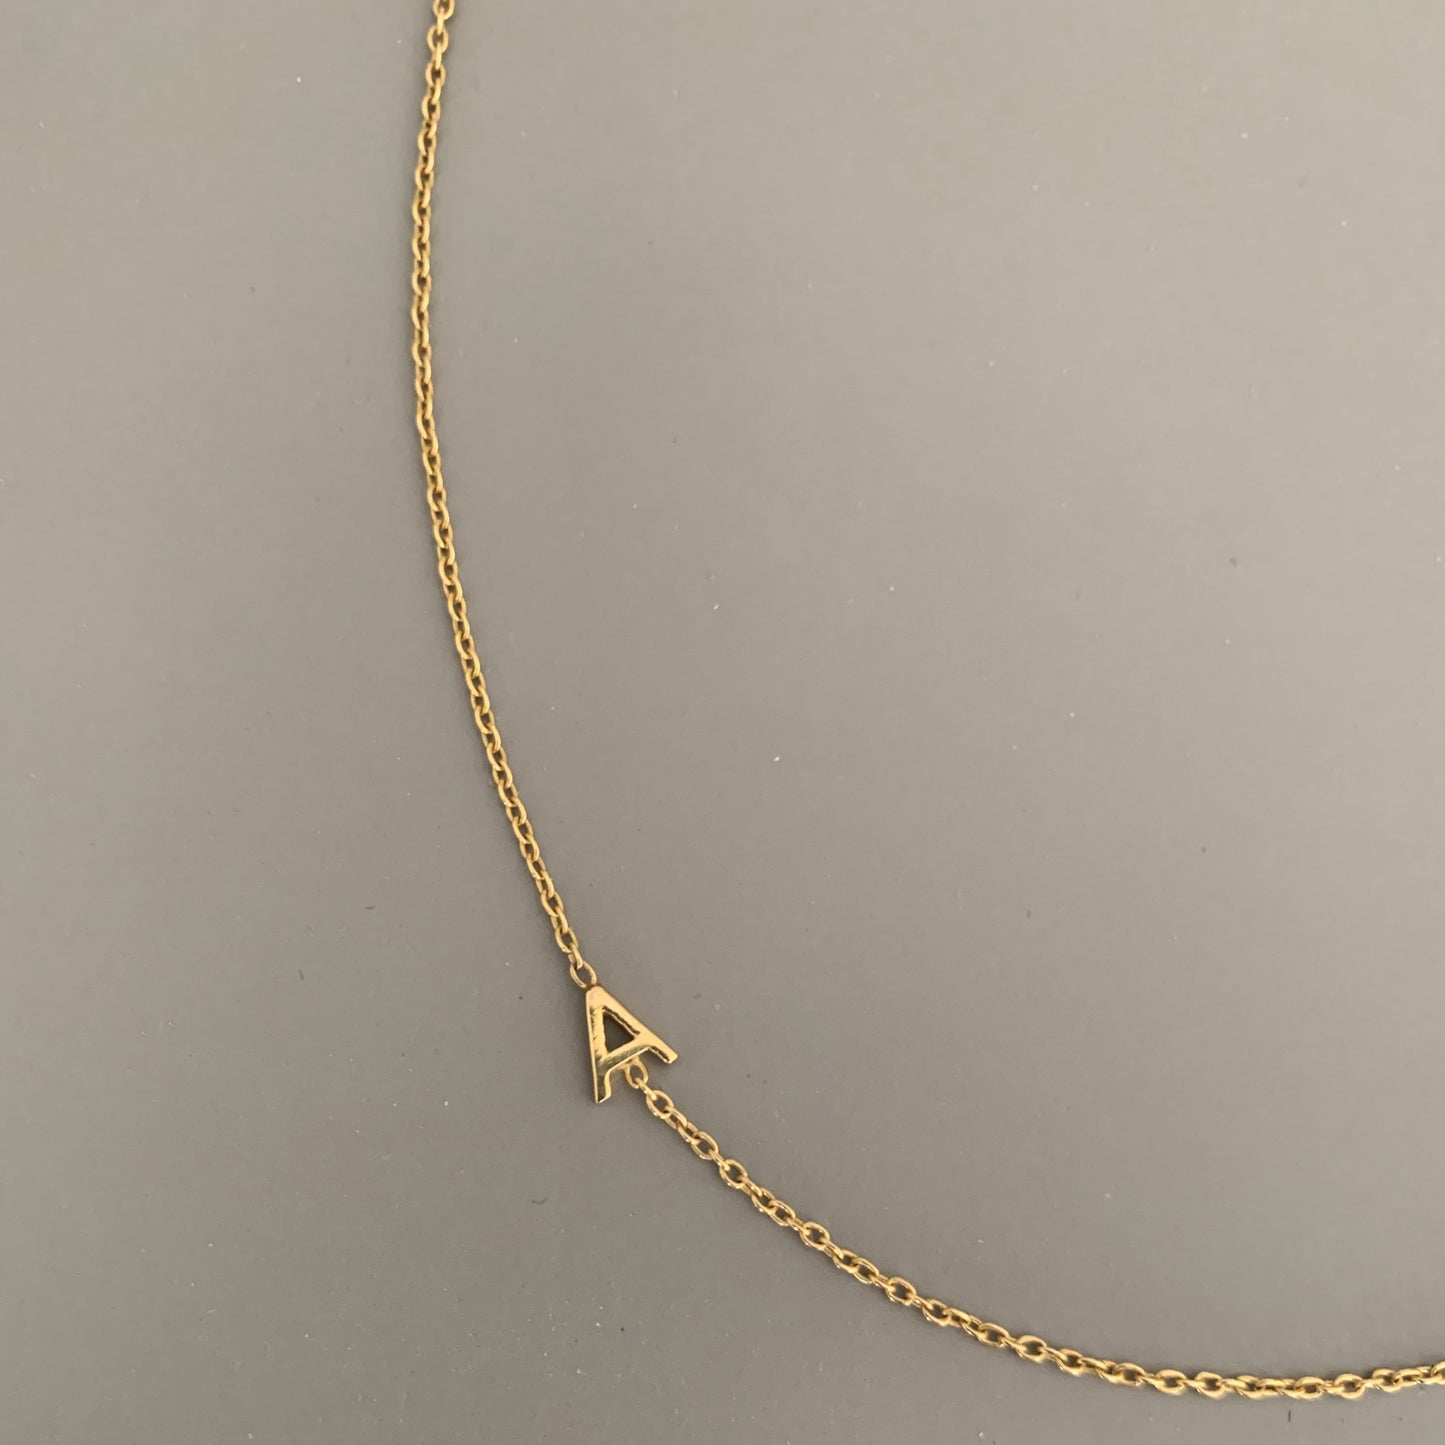 SIDE ON INITIAL NECKLACE SILVER/GOLD